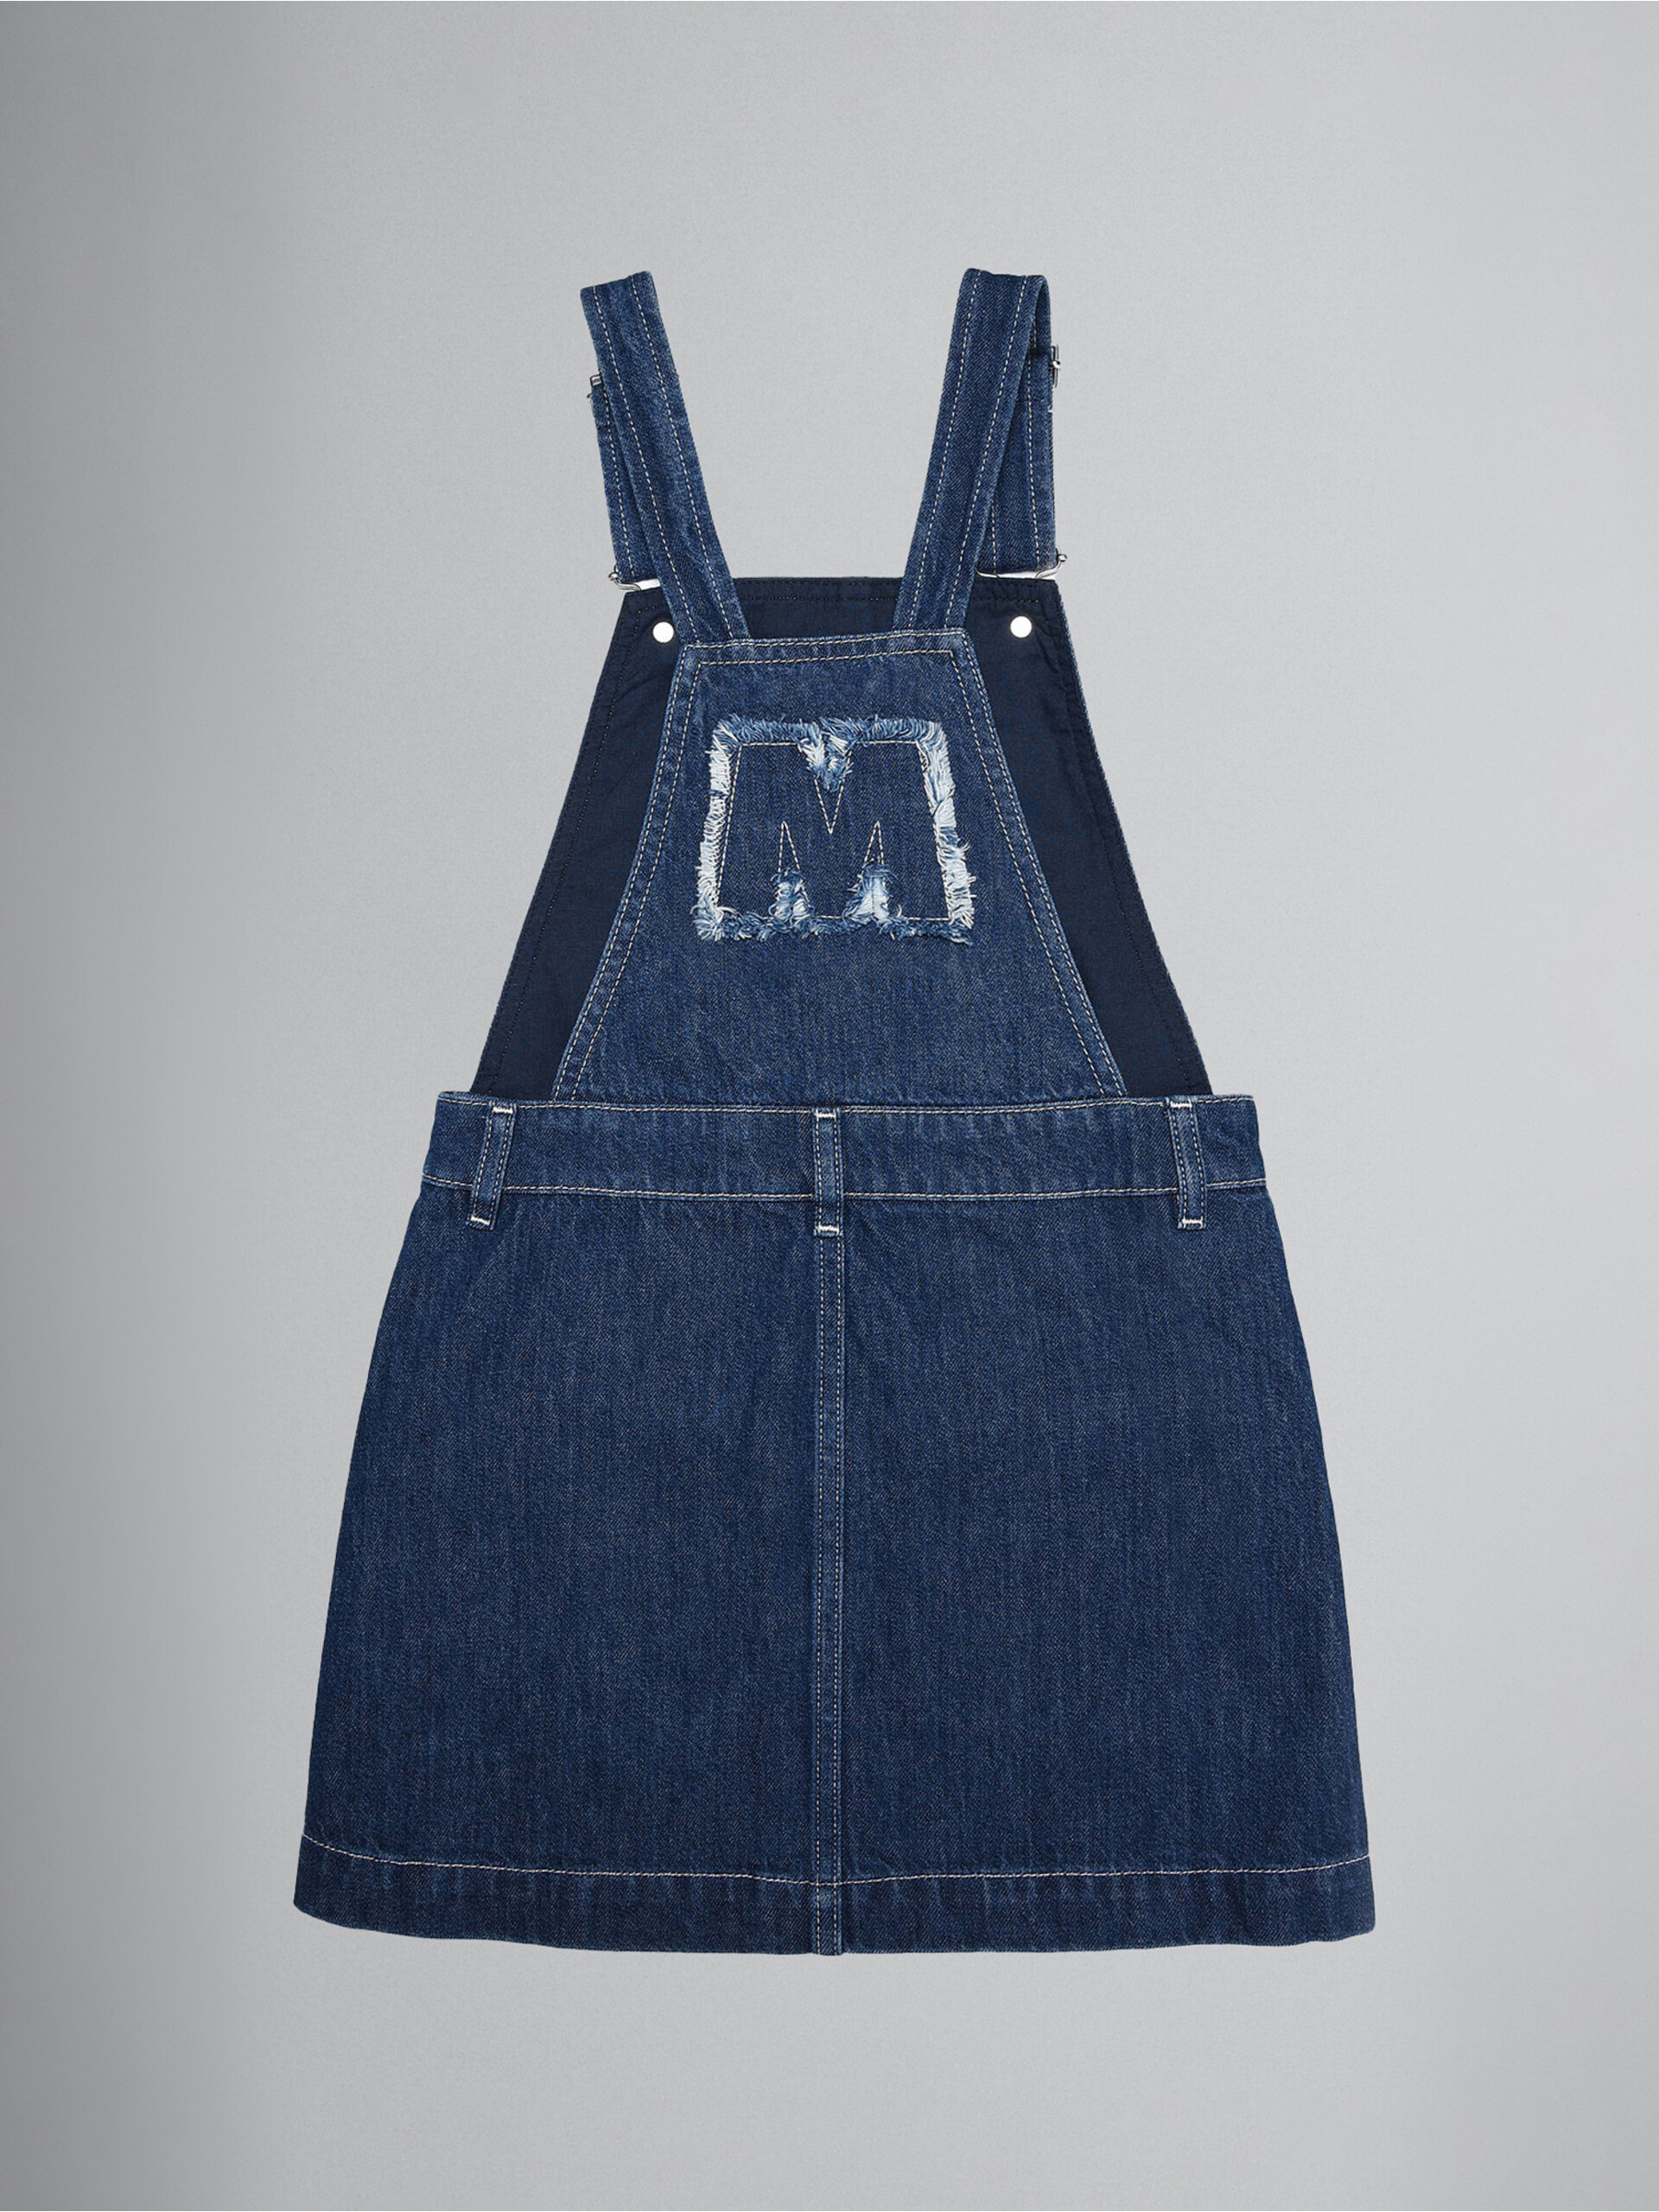 Denim pinafore dress with frayed "M" patch - Dresses - Image 2